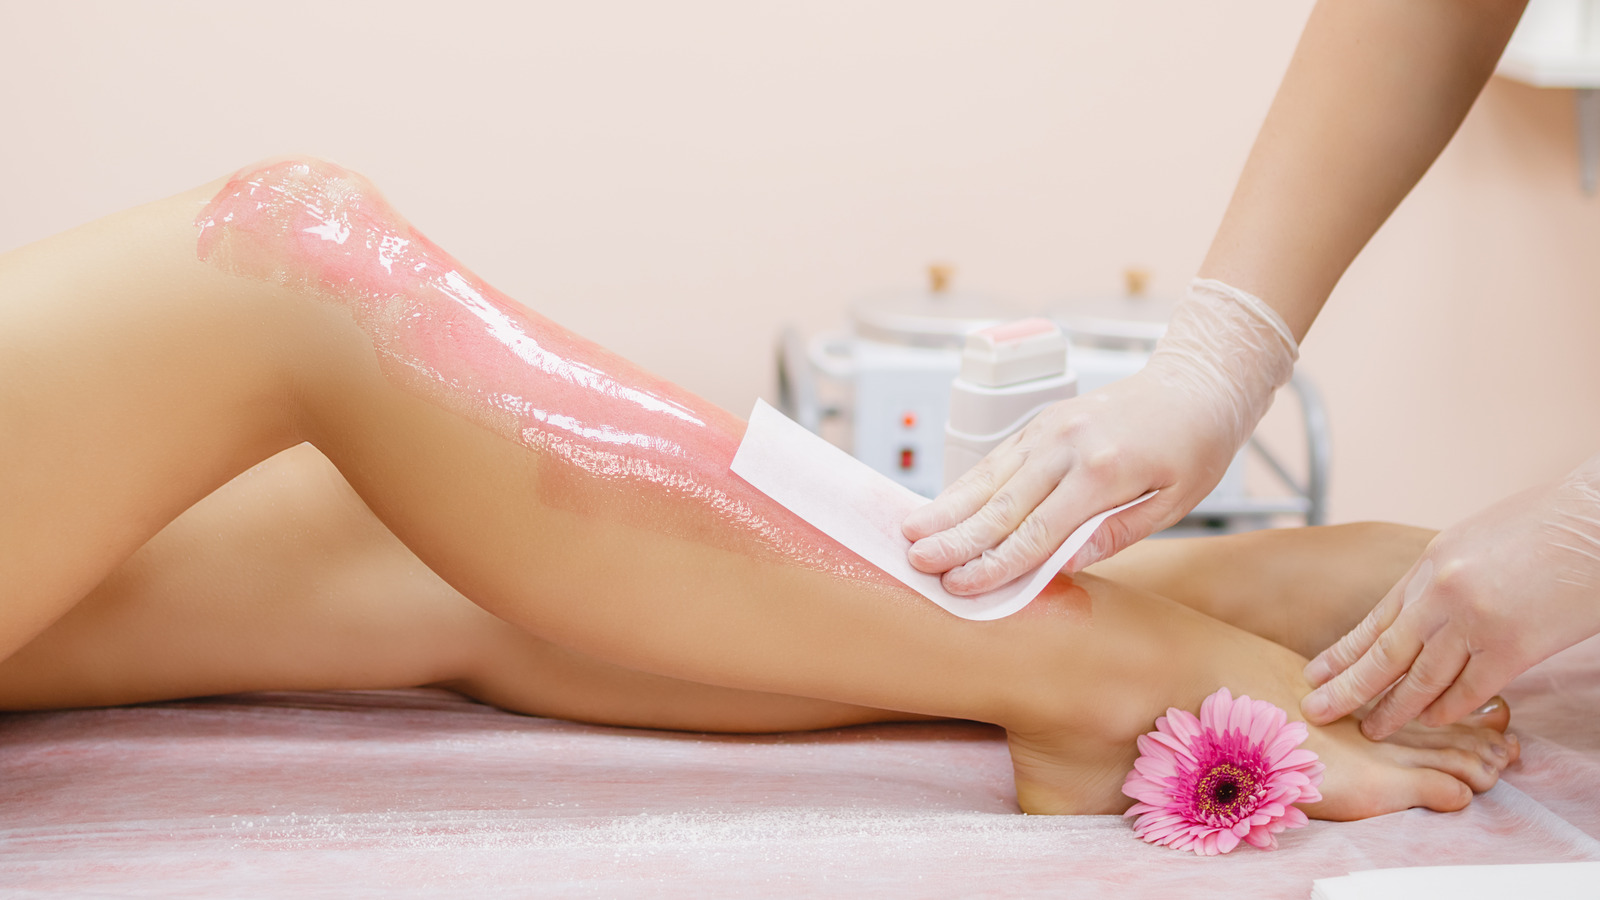 Is Laser Hair Removal Or Waxing More Effective?